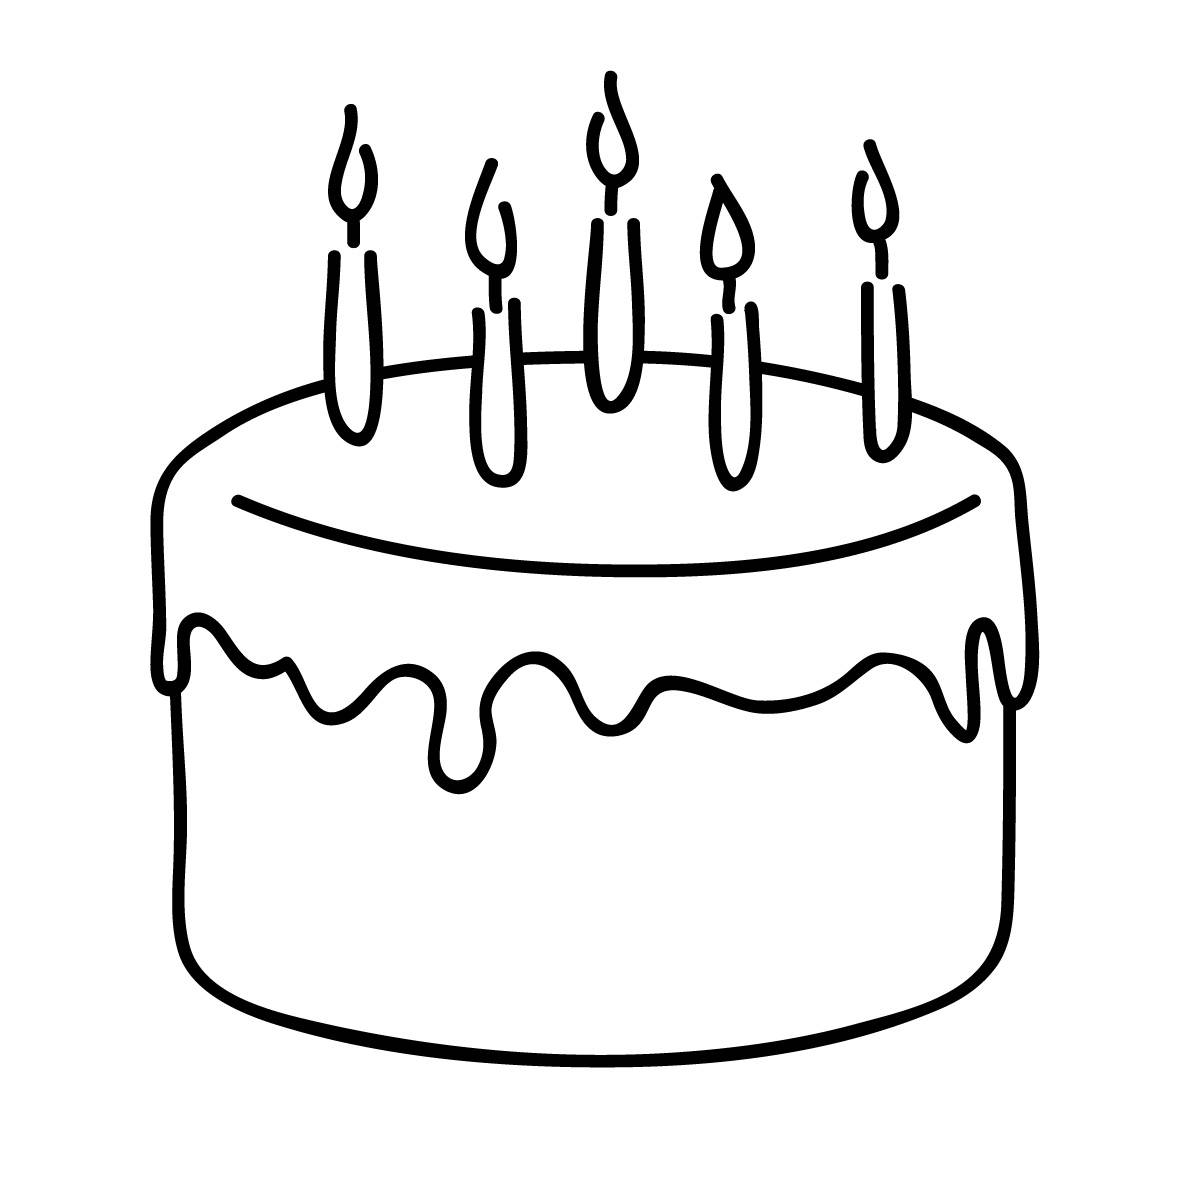 Happy birthday black and. Cake clipart outline